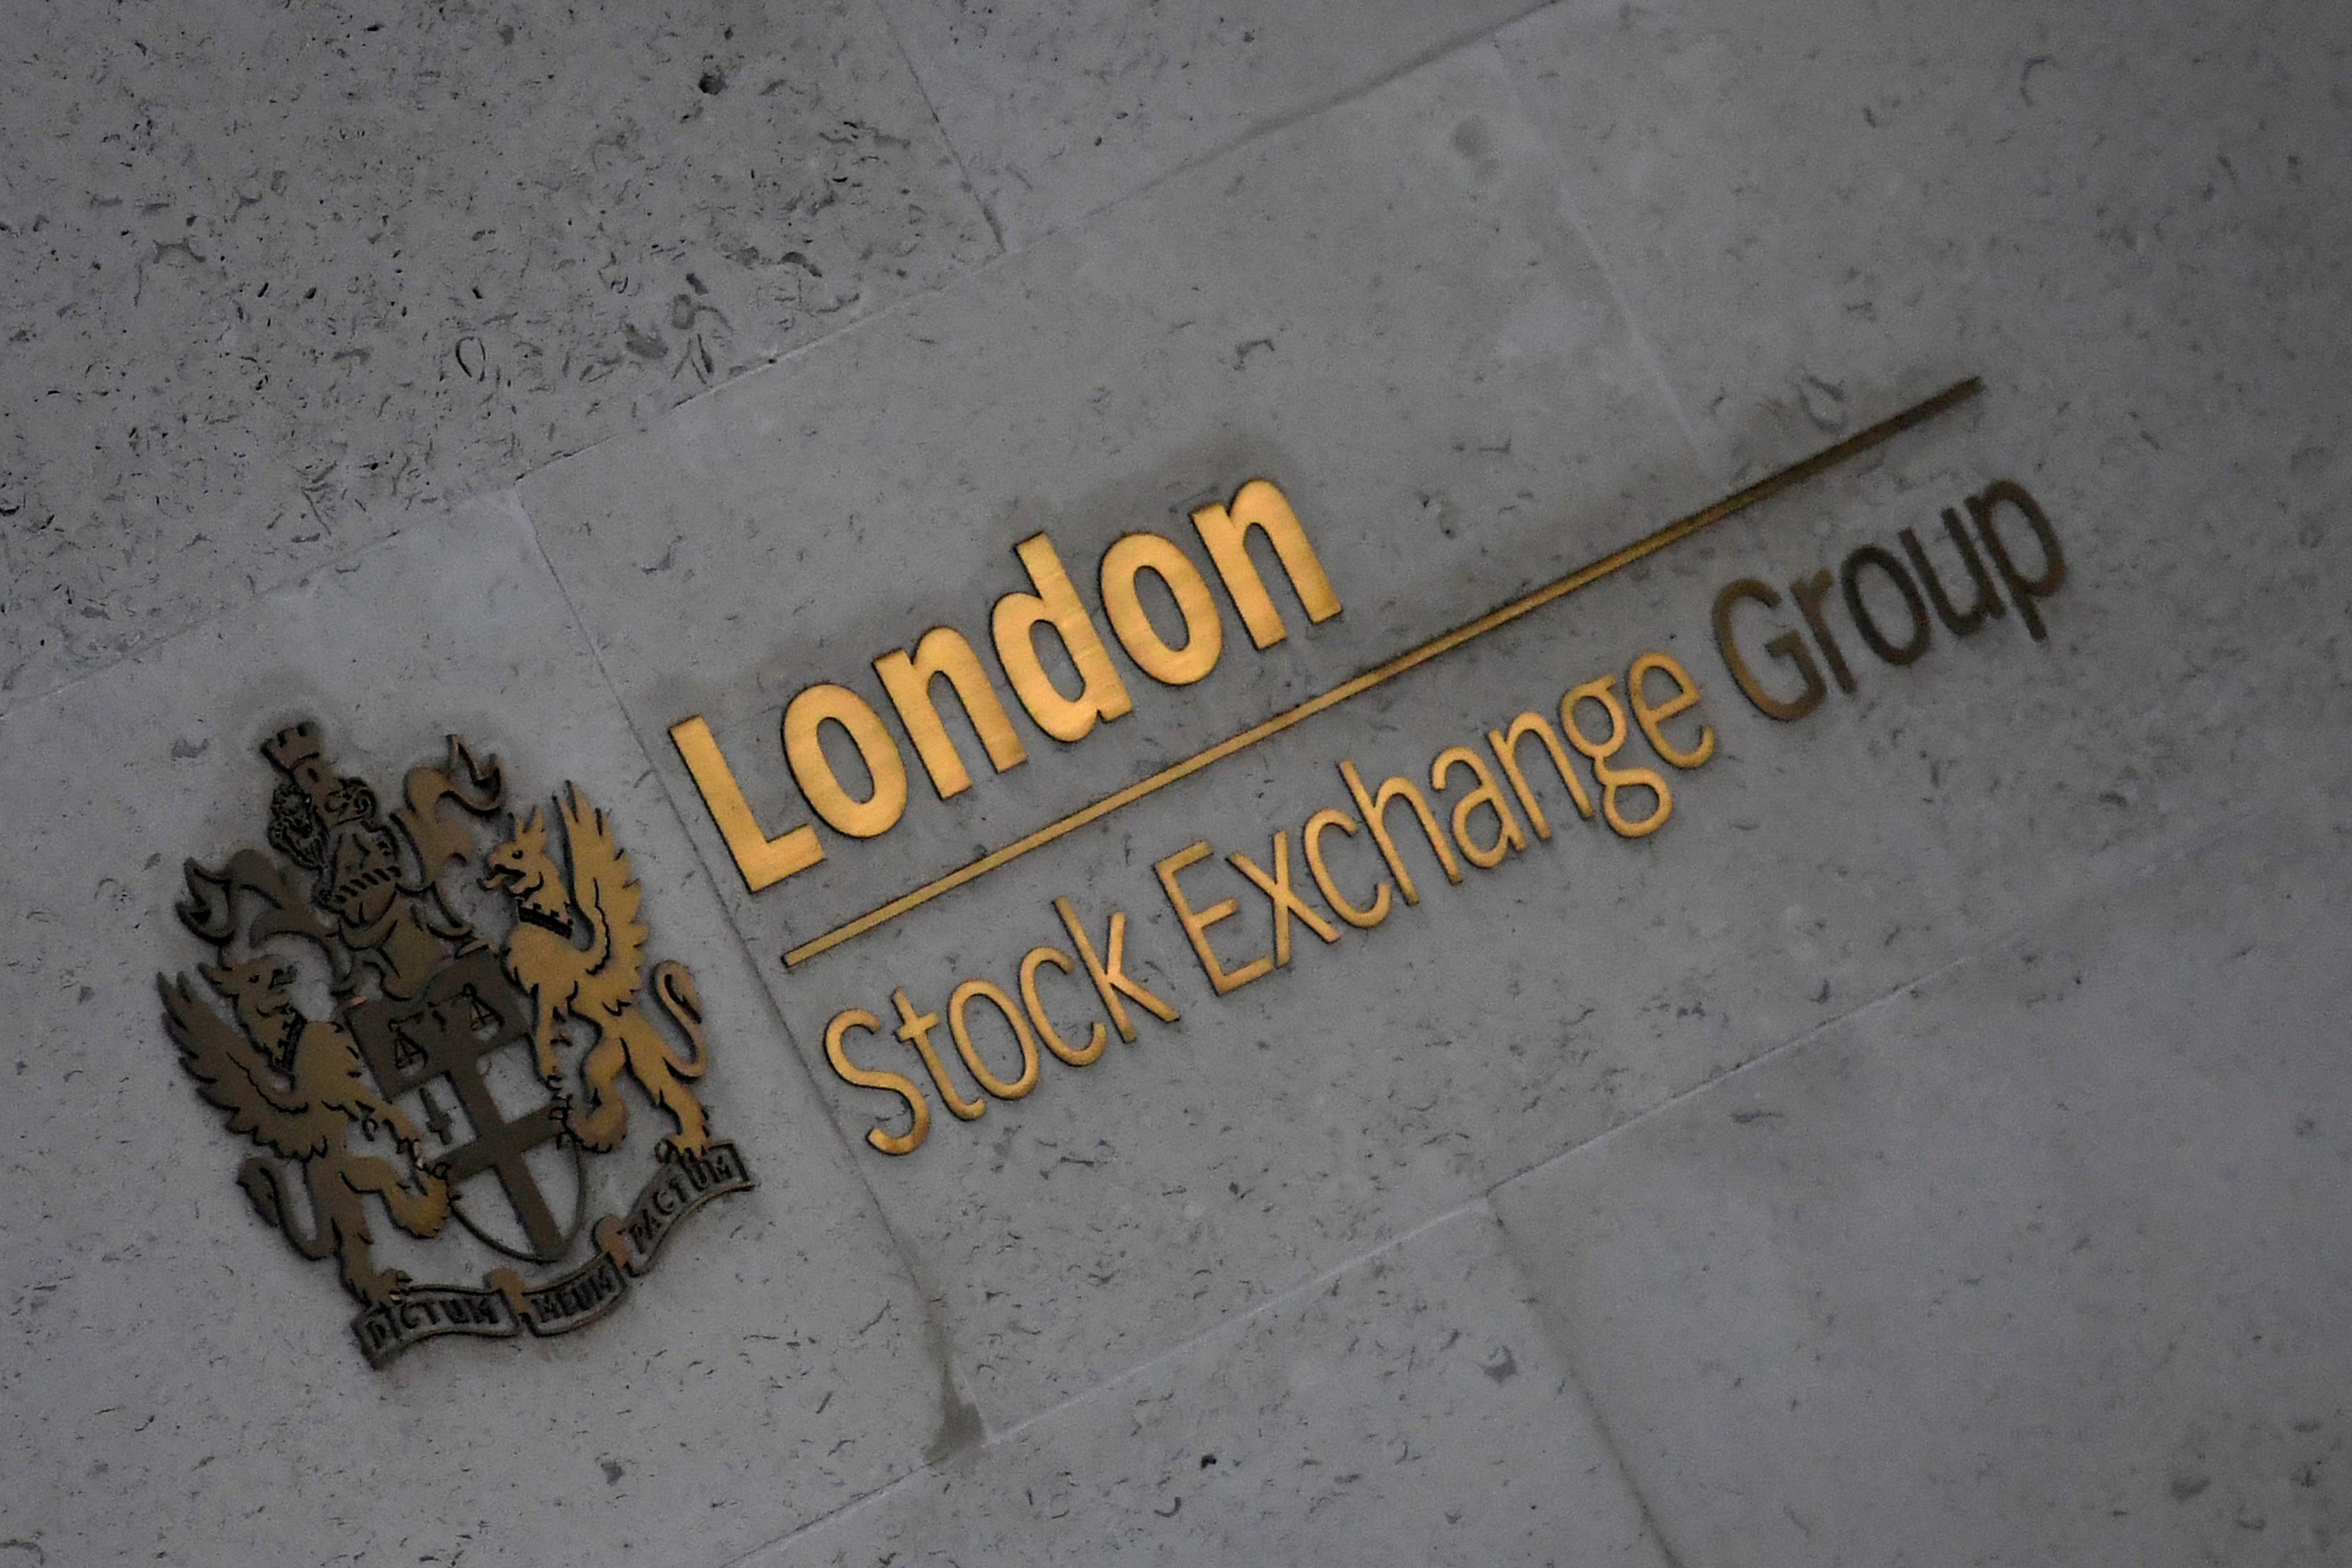 The offices of the London Stock Exchange Group are seen in the City of London, Great Britain